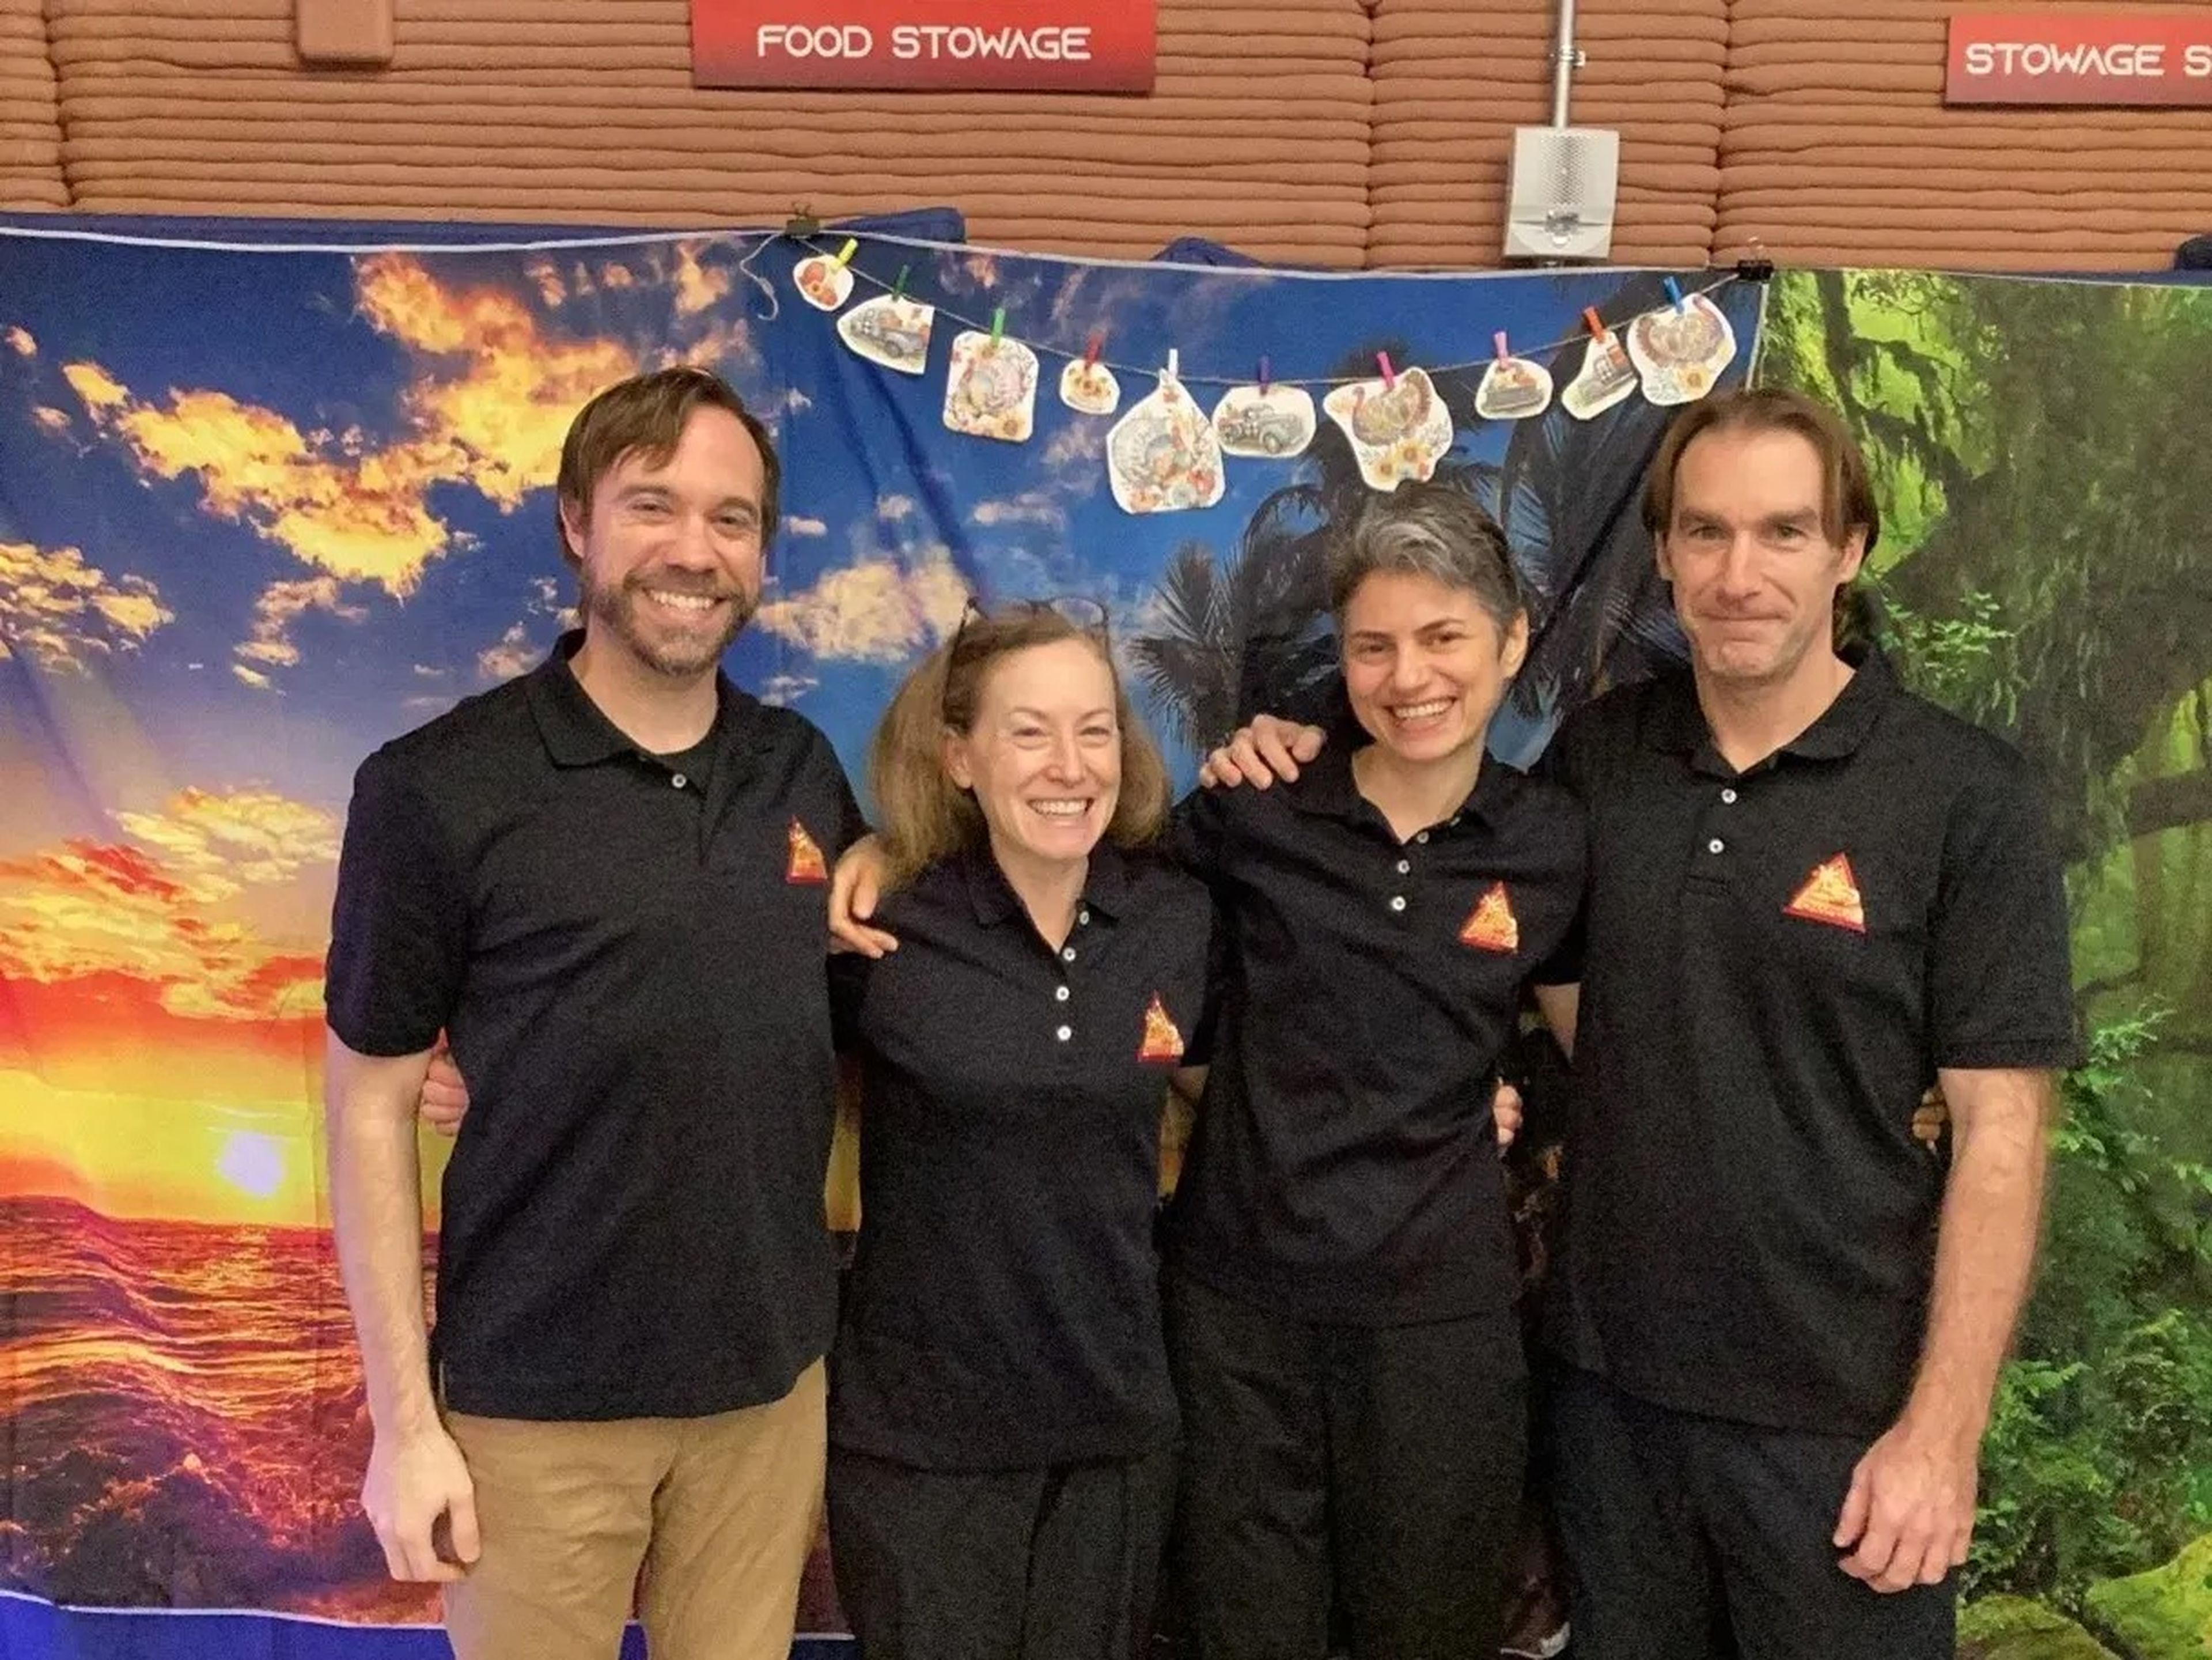 four people wearing black polo shirts with the same small orange triangle logo pose together in front of a hanging tapestry of an island sunset with thanksgiving turkey drawings pinned at the top